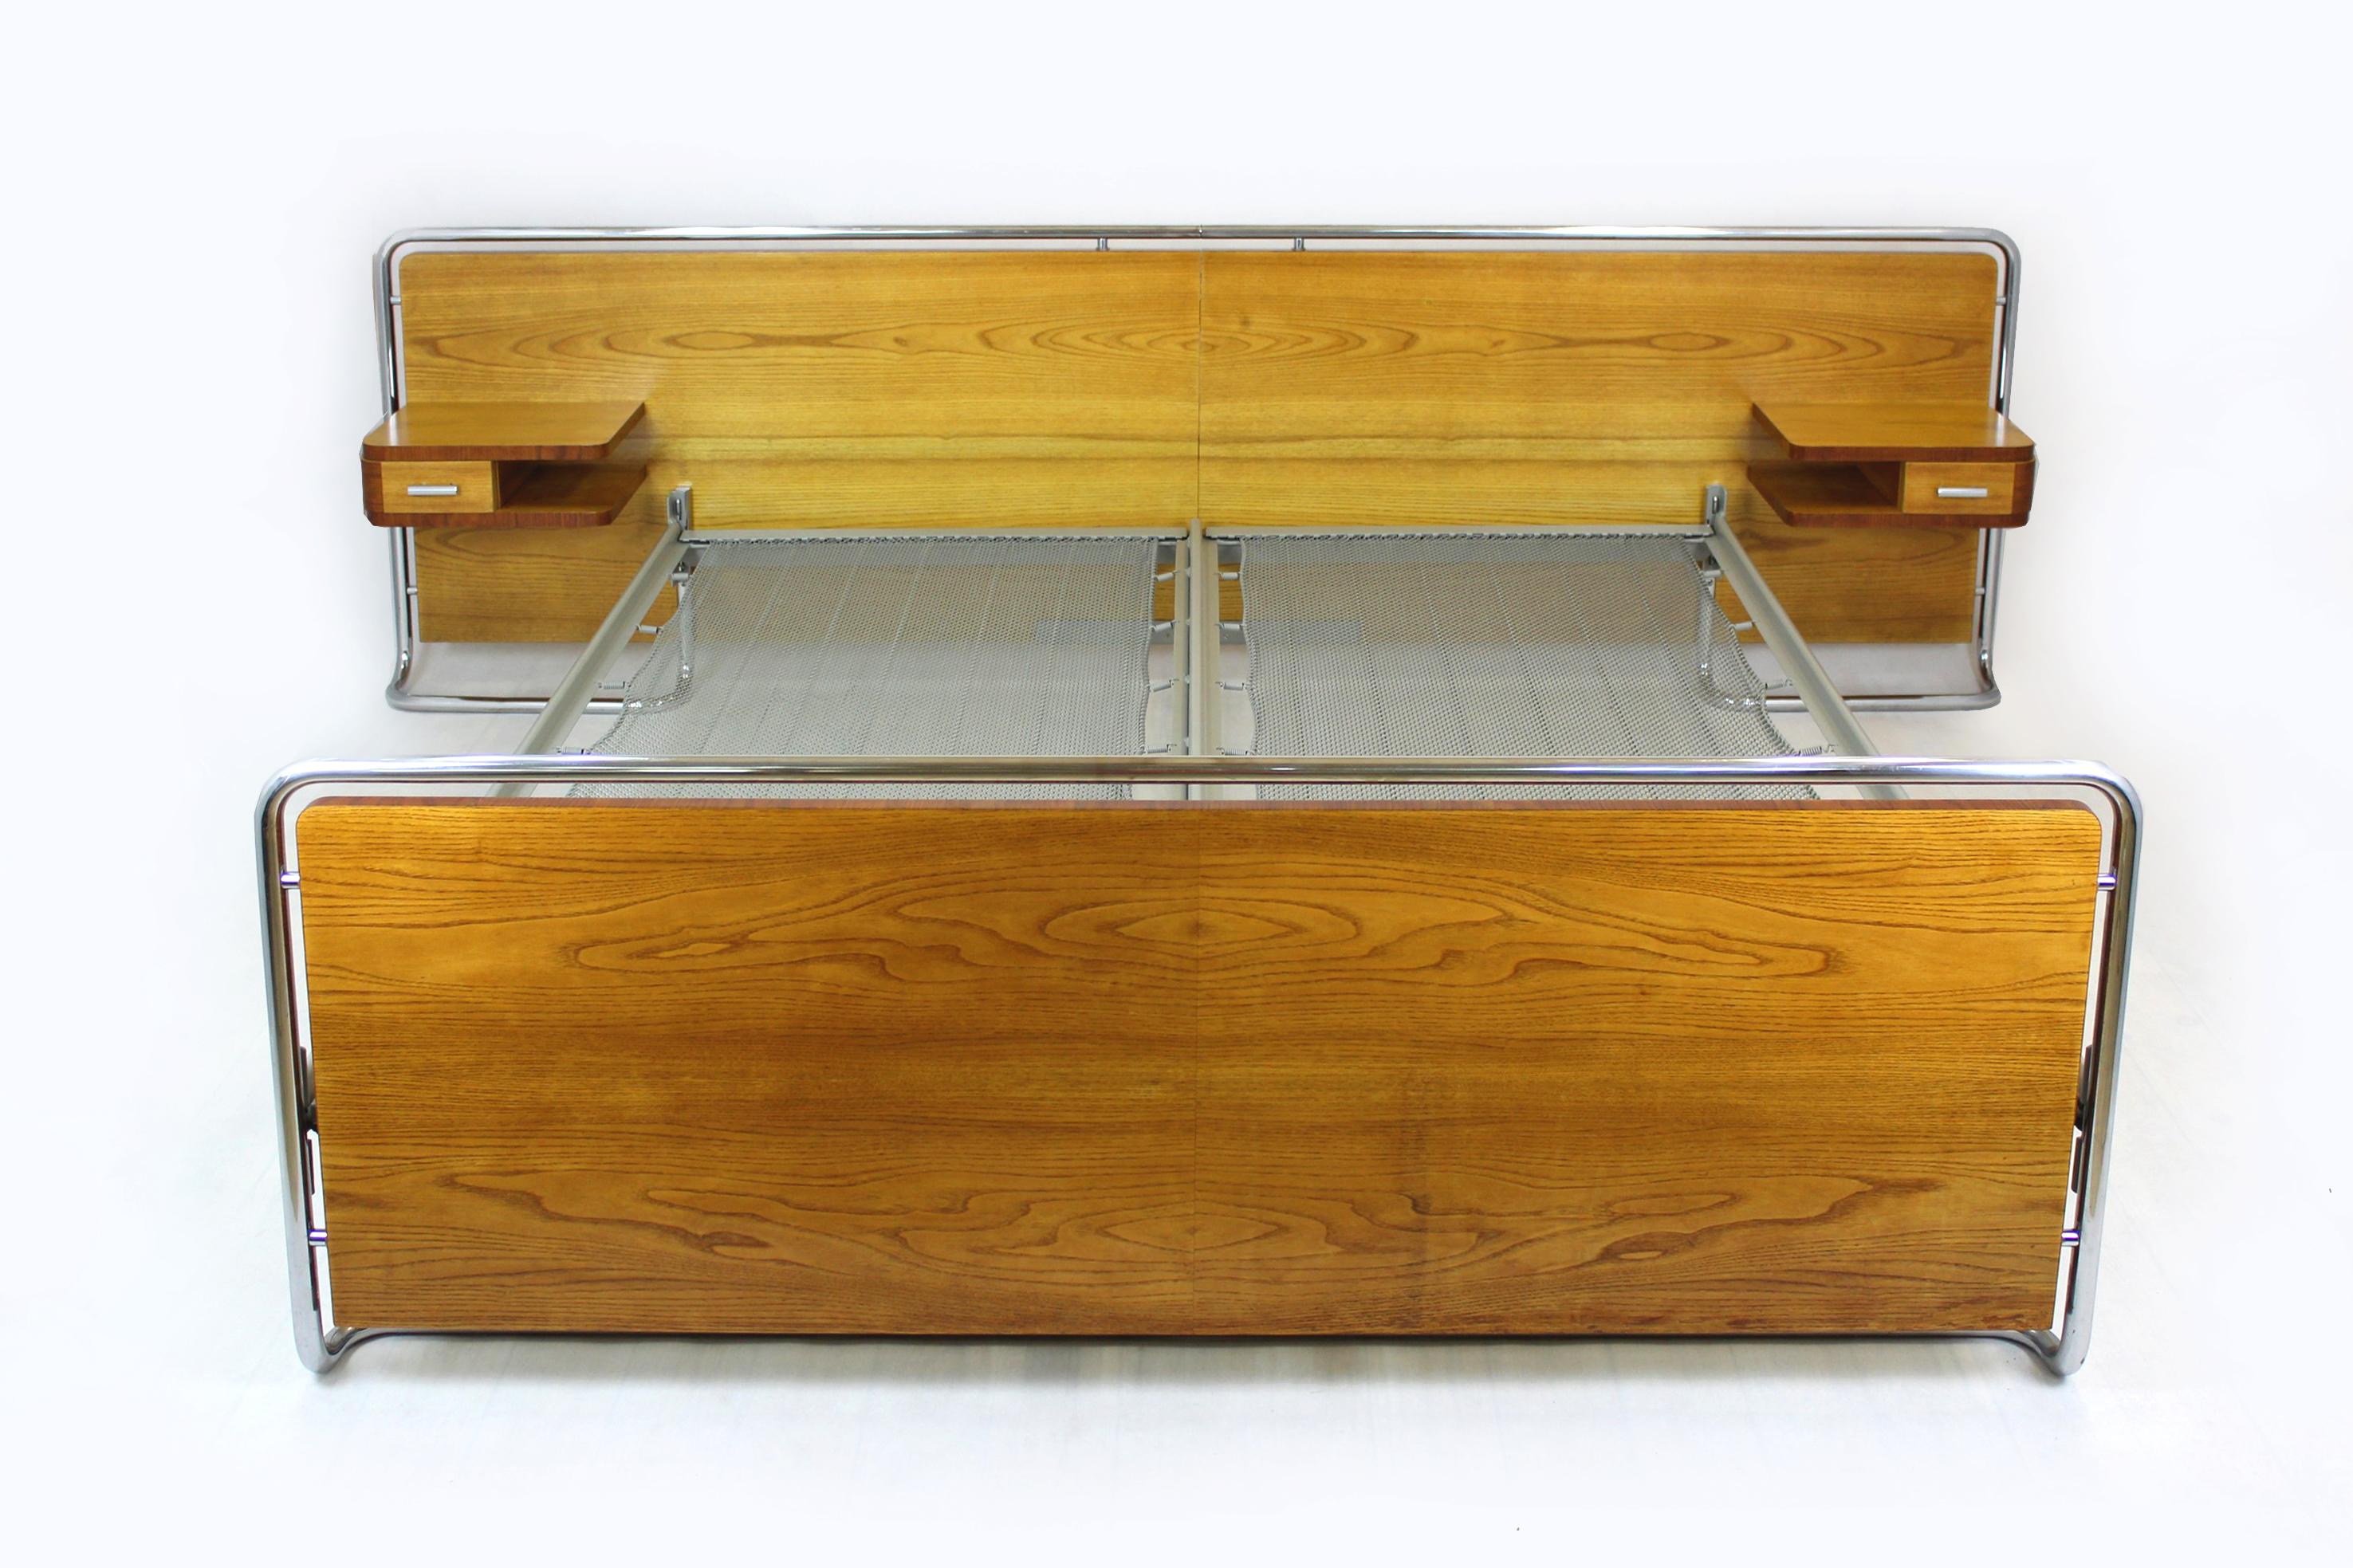 This Bauhaus style bedroom set was produced by Rudolf Vichr in the 1940's in Czechoslovakia.
The set consists of a double bed, two suspended bedside tables and a dressing table with a mirror. The furniture is veneered with two types of wood - ash